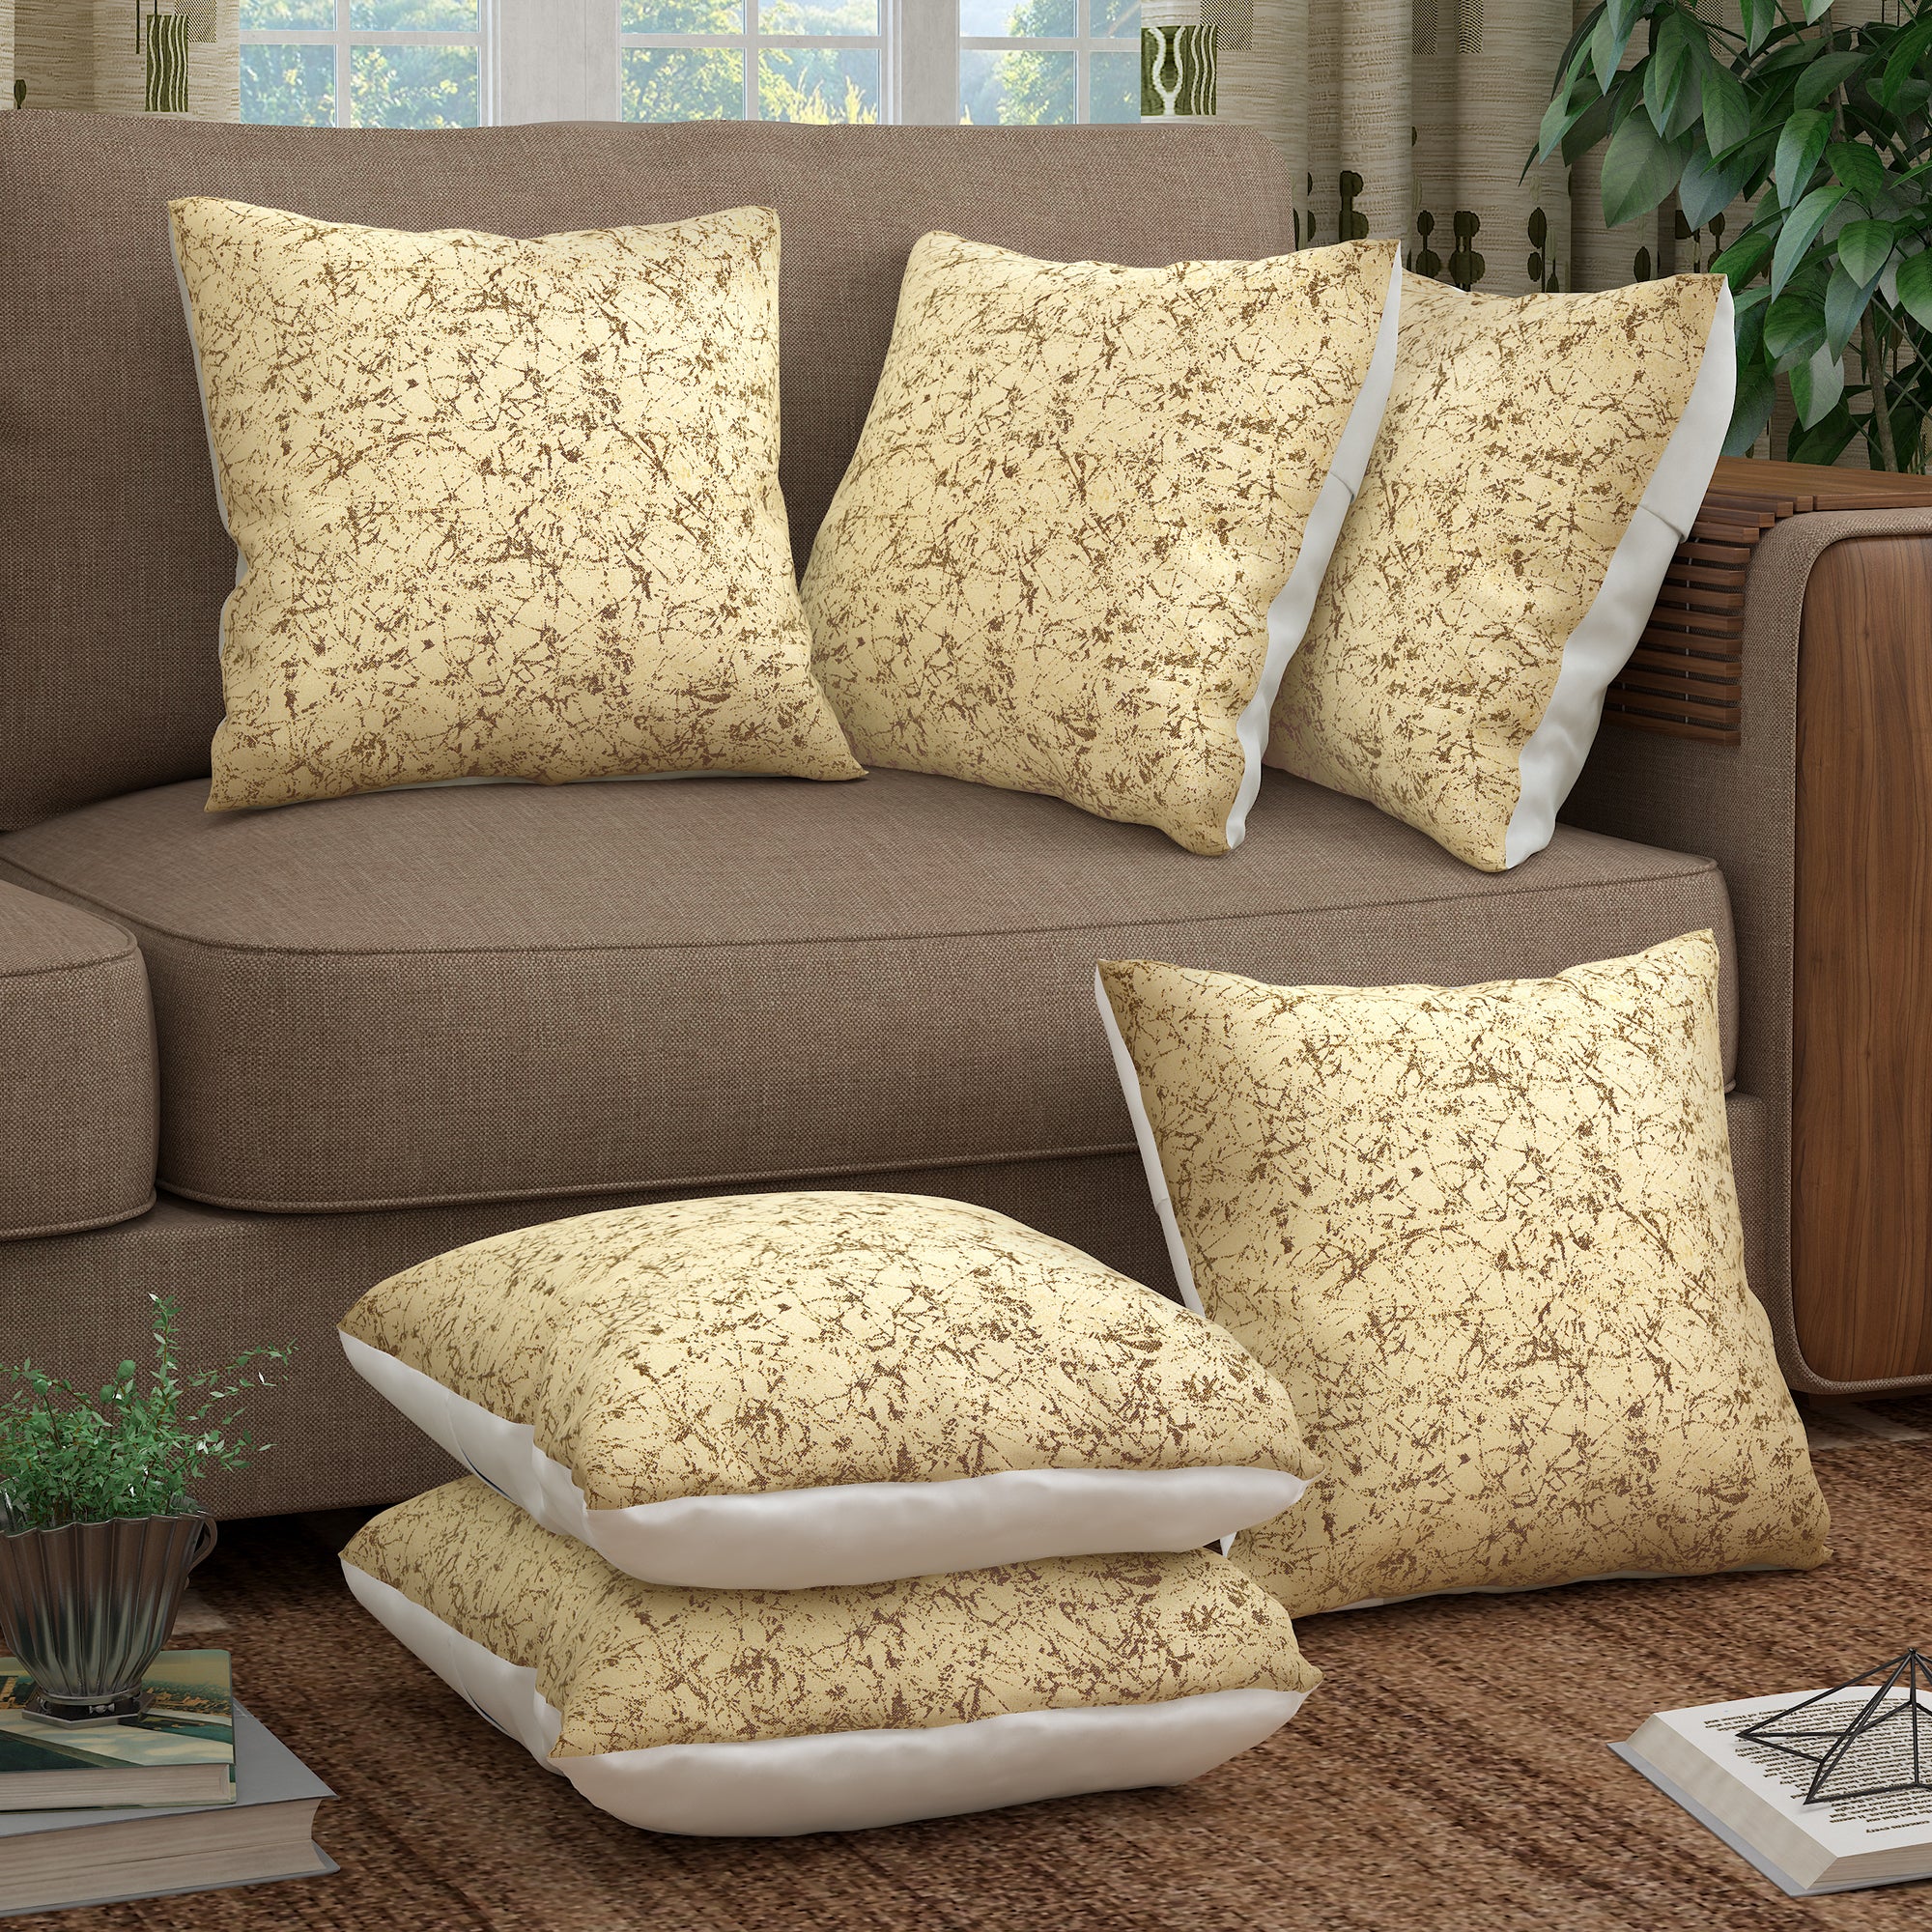 Story@Home Cream Abstract Polyester 6 pcs of Alegra Cushion Covers